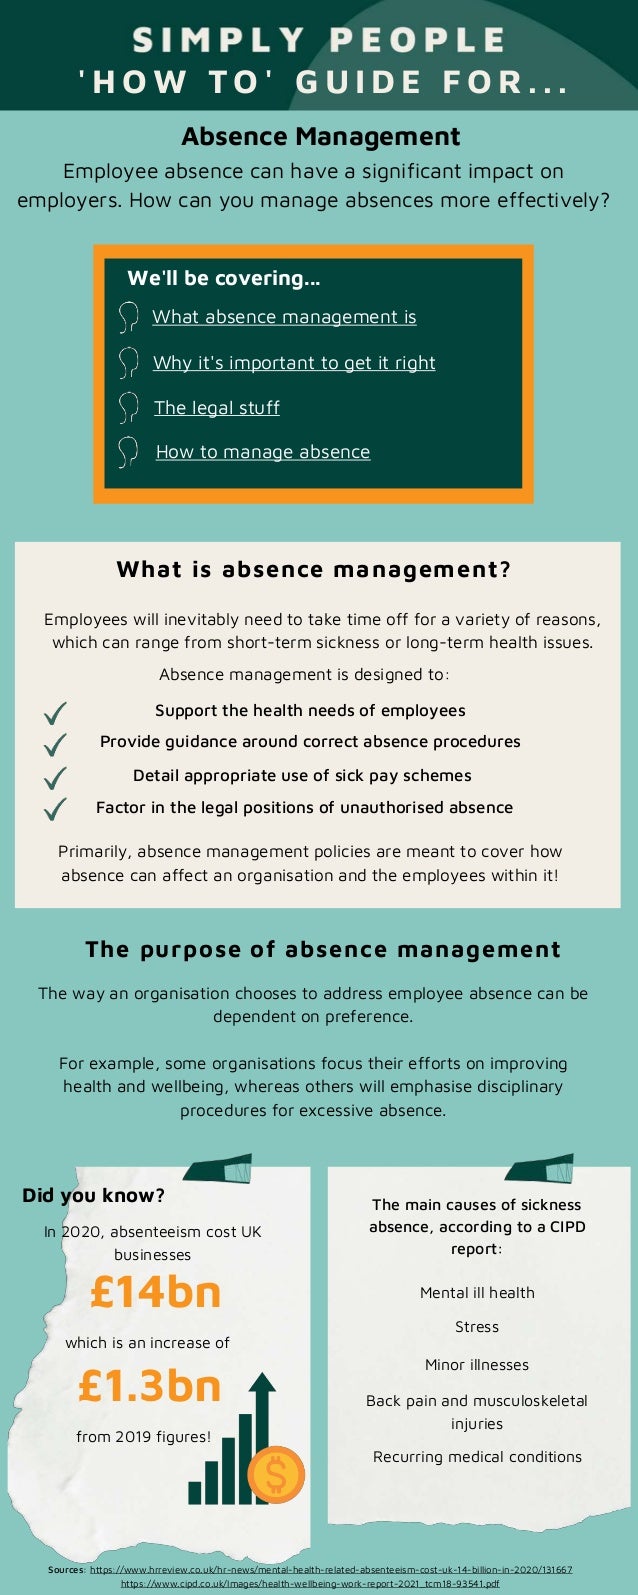 Absence Management
Employee absence can have a significant impact on
employers. How can you manage absences more effectively?
What is absence management?
' H O W T O ' G U I D E F O R . . .
We'll be covering...
What absence management is
Why it's important to get it right
The way an organisation chooses to address employee absence can be
dependent on preference.
For example, some organisations focus their efforts on improving
health and wellbeing, whereas others will emphasise disciplinary
procedures for excessive absence.
Support the health needs of employees
Provide guidance around correct absence procedures
Detail appropriate use of sick pay schemes
Factor in the legal positions of unauthorised absence
Primarily, absence management policies are meant to cover how
absence can affect an organisation and the employees within it!
The purpose of absence management
Absence management is designed to:
Employees will inevitably need to take time off for a variety of reasons,
which can range from short-term sickness or long-term health issues.
Did you know?
In 2020, absenteeism cost UK
businesses
£14bn
which is an increase of
£1.3bn
from 2019 figures!
Sources: https://www.hrreview.co.uk/hr-news/mental-health-related-absenteeism-cost-uk-14-billion-in-2020/131667
https://www.cipd.co.uk/Images/health-wellbeing-work-report-2021_tcm18-93541.pdf
The main causes of sickness
absence, according to a CIPD
report:
Mental ill health
Stress
Minor illnesses
Back pain and musculoskeletal
injuries
Recurring medical conditions
The legal stuff
How to manage absence
 